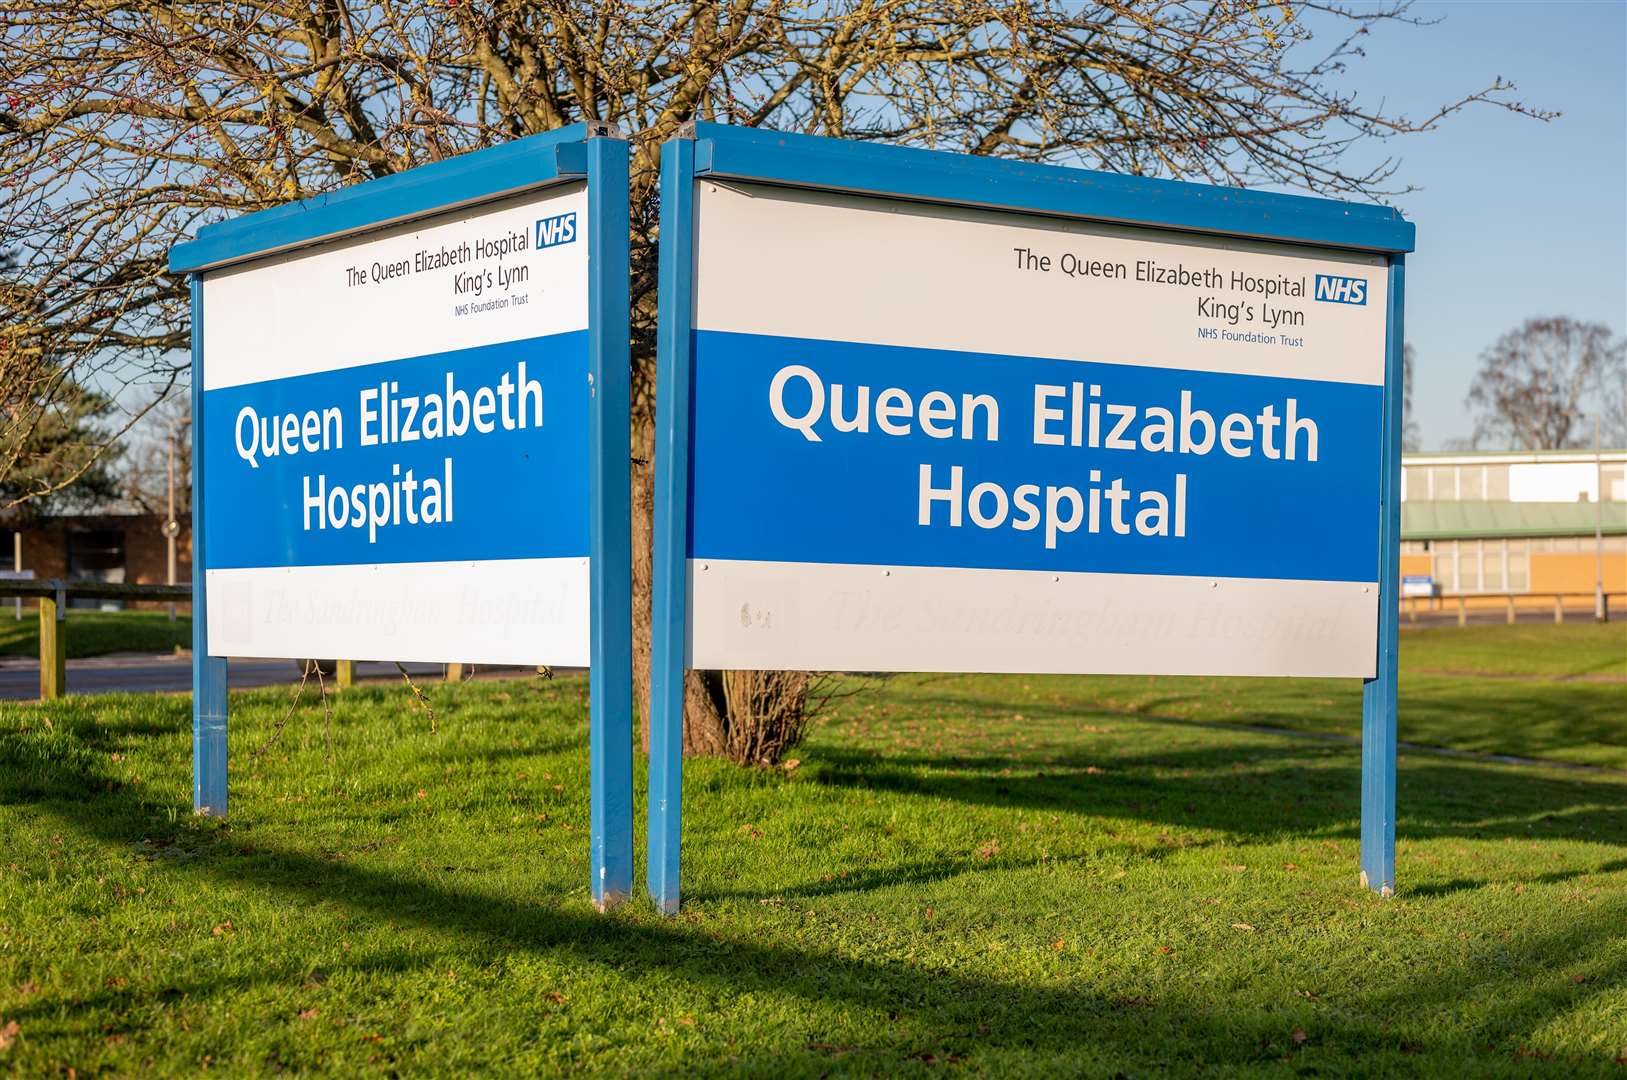 The incident happened at Lynn’s Queen Elizabeth Hospital